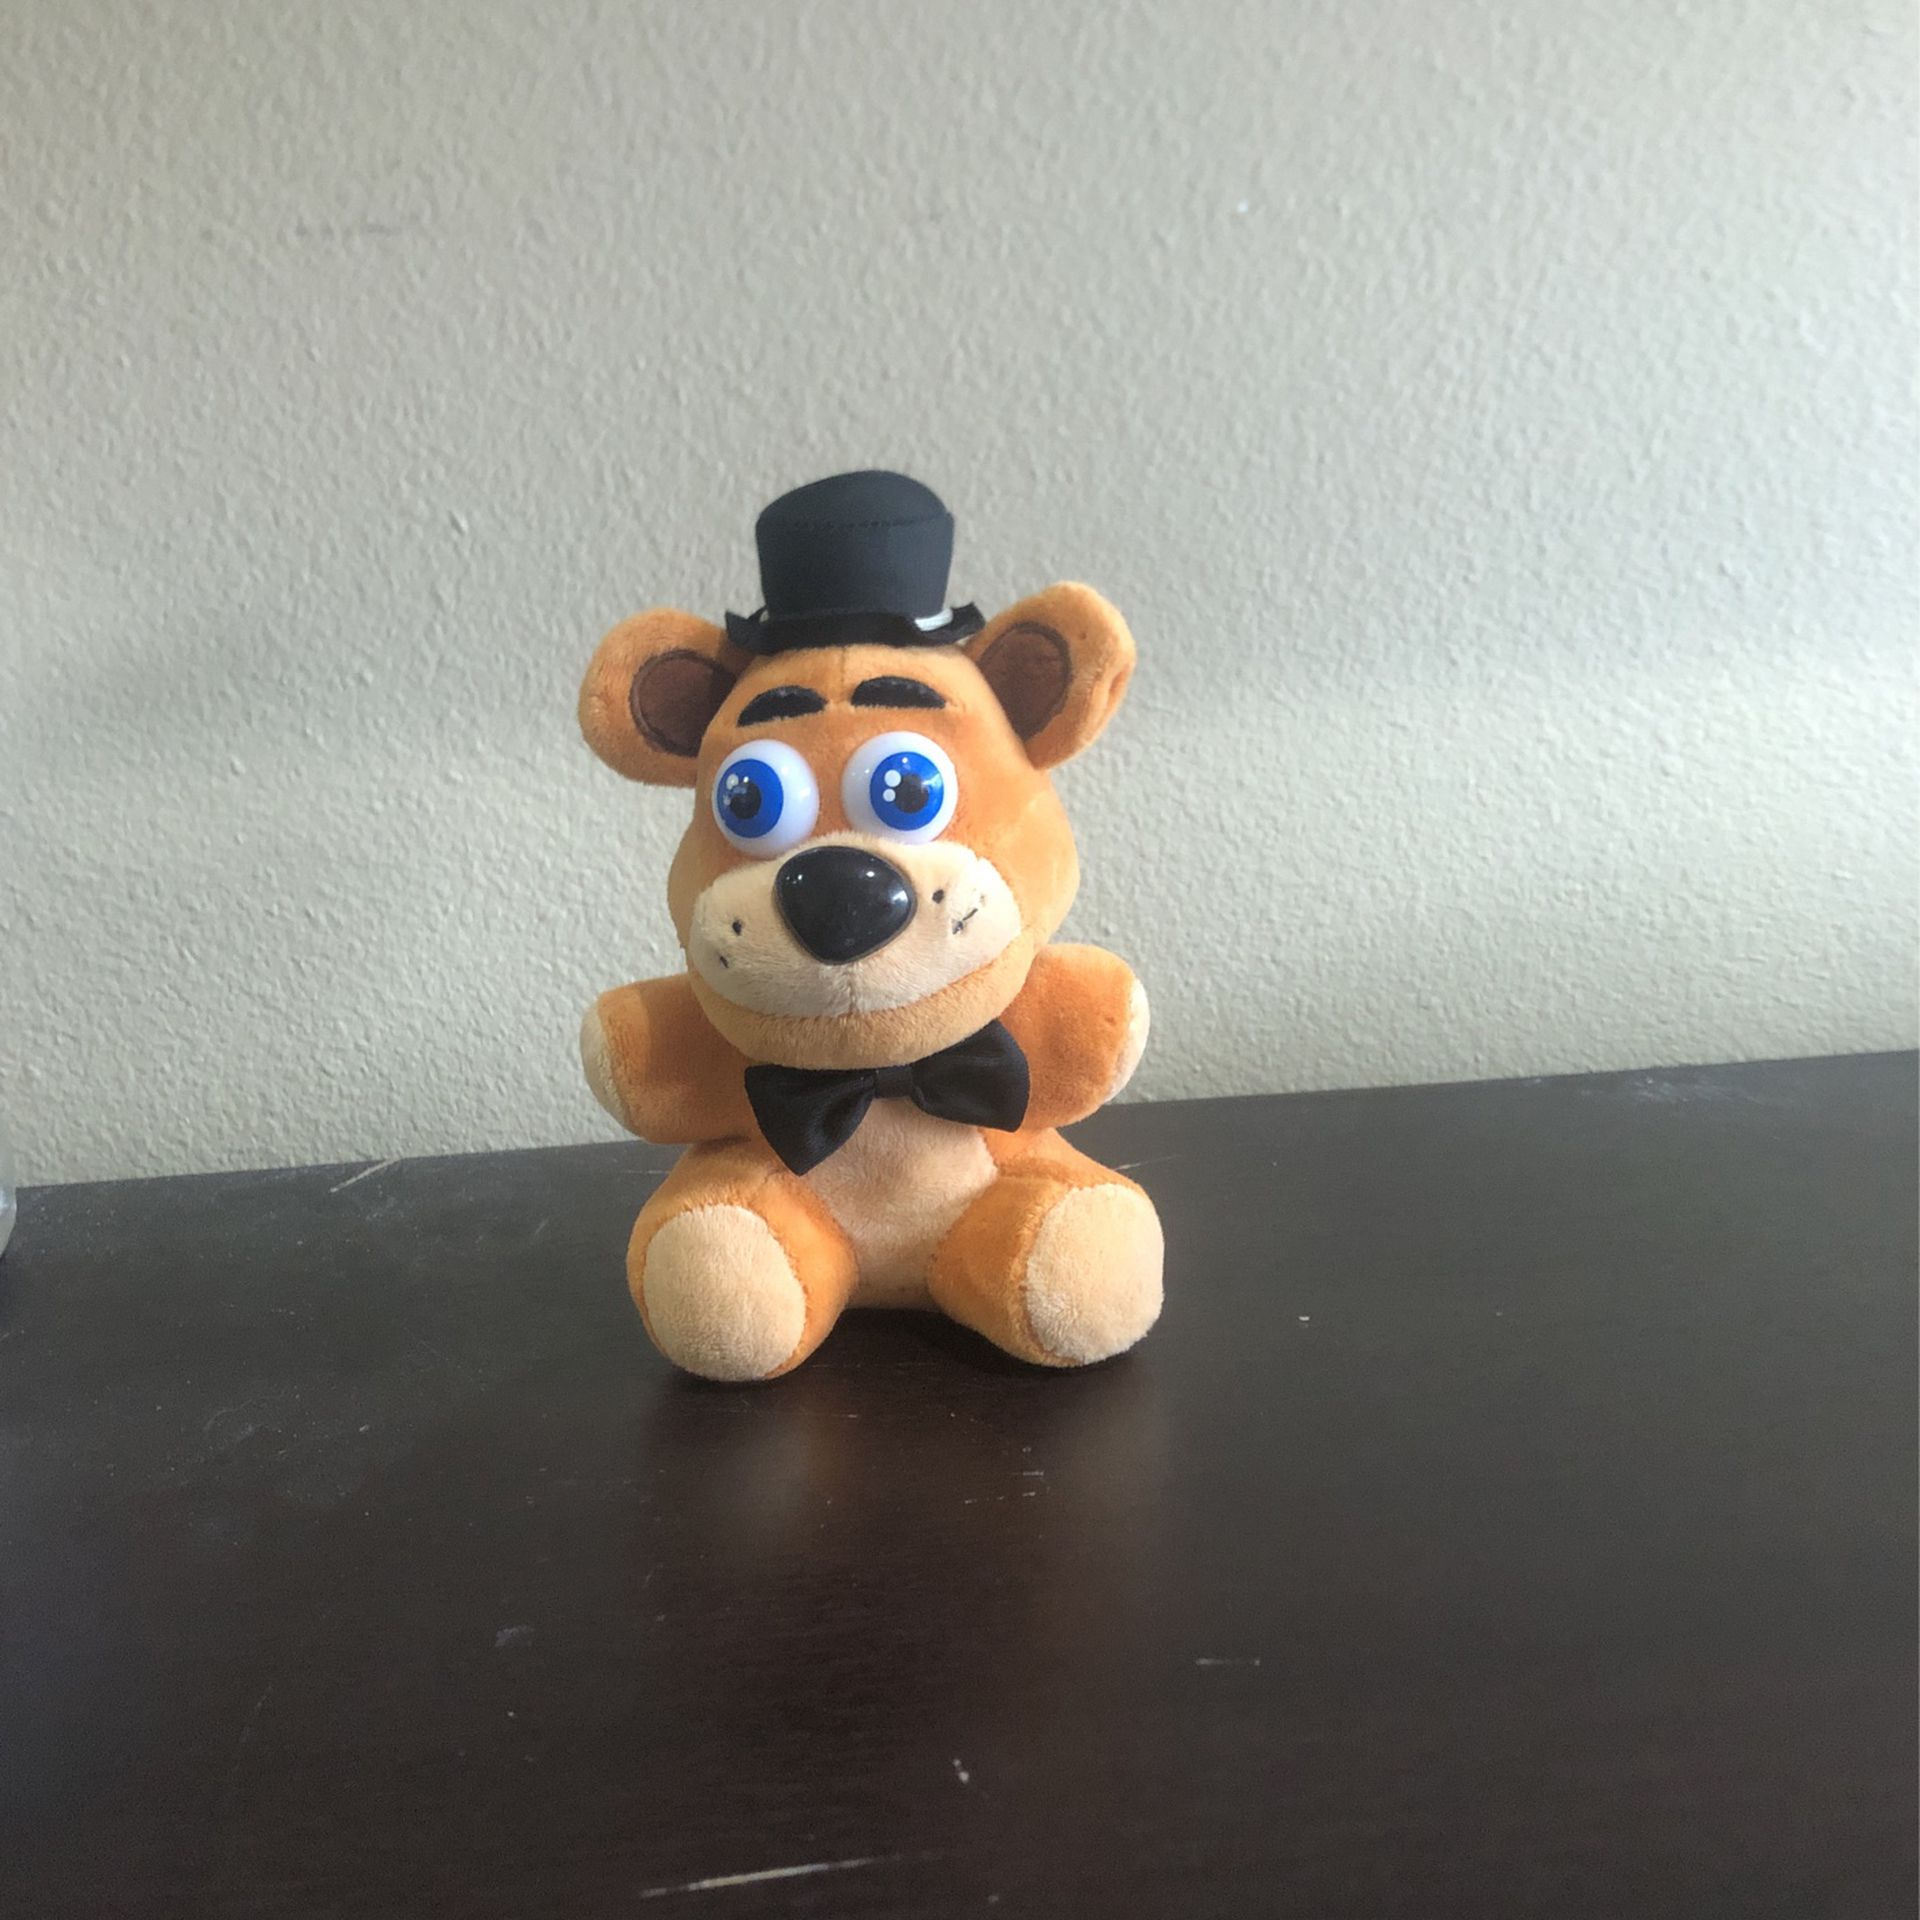 Plushy From Five Nights At Freddy’s